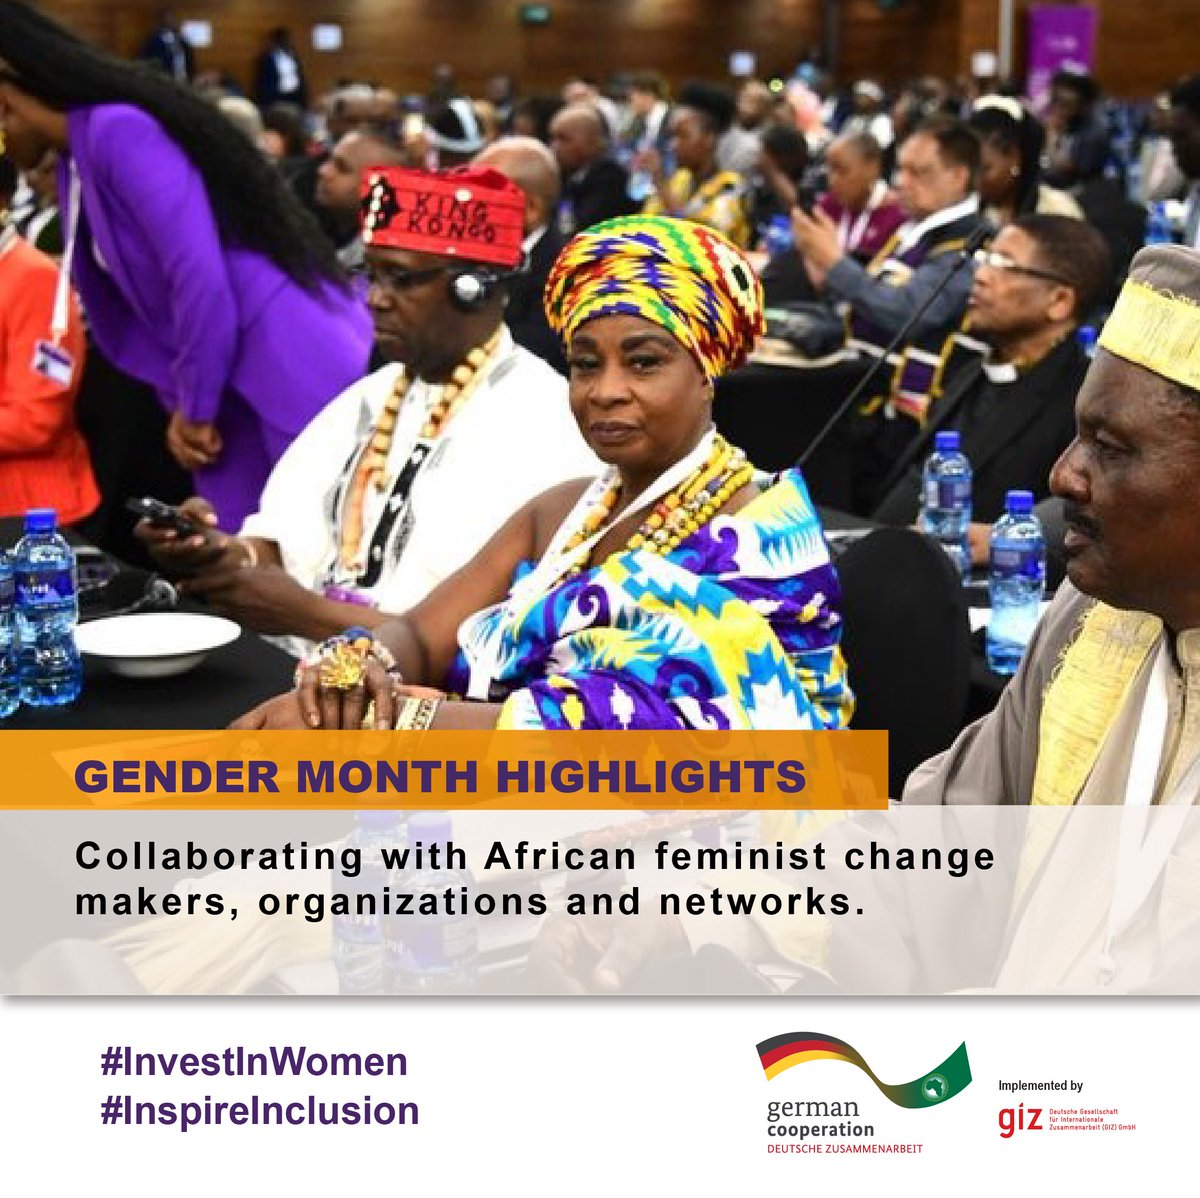 Despite leading efforts, #feminist organisations receive only 0.13% of official development assistance. Using a #gendertransformative approach, the GIZ AWARE project works to counter this trend in cooperation with #African feminist change makers, organisations & networks.